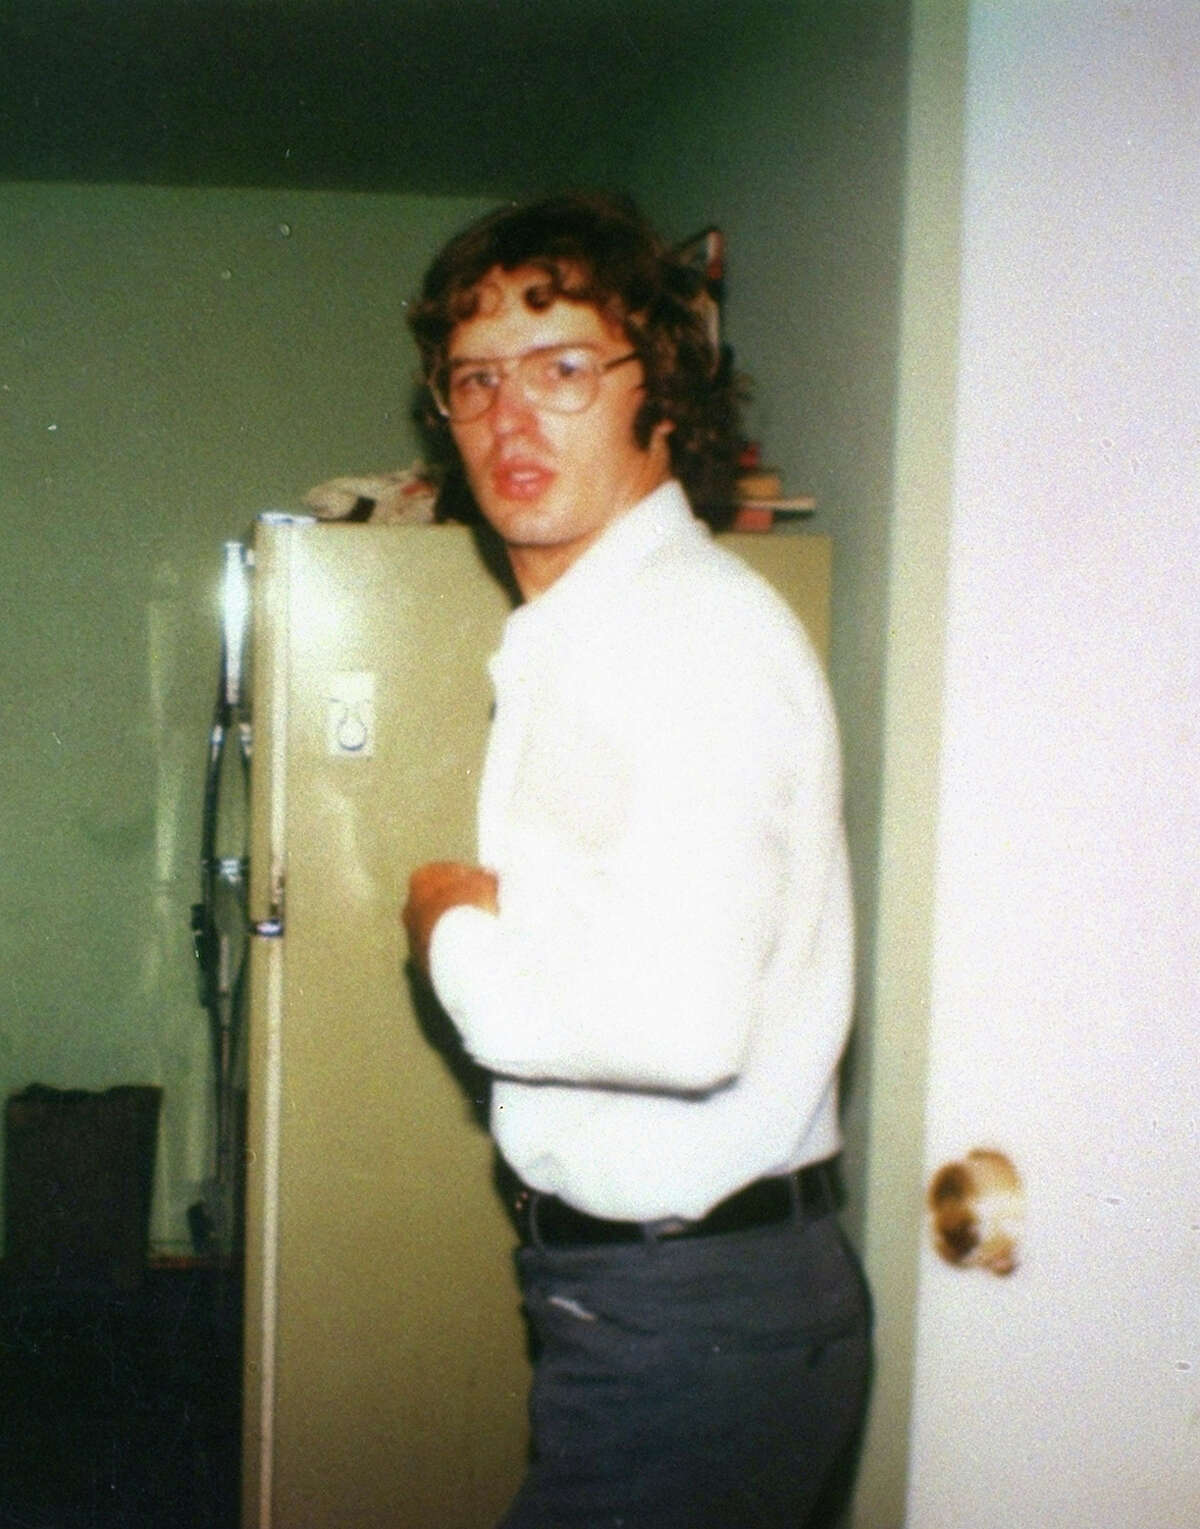 This is a 1981 photo of David Koresh taken at the Mount Carmel compound of the Branch Davidians cult near Waco, Texas. Koresh, the leader of the cult who claims to be Christ, and his followers, were involved in a standoff with police at the compound in 1993. (AP Photo)